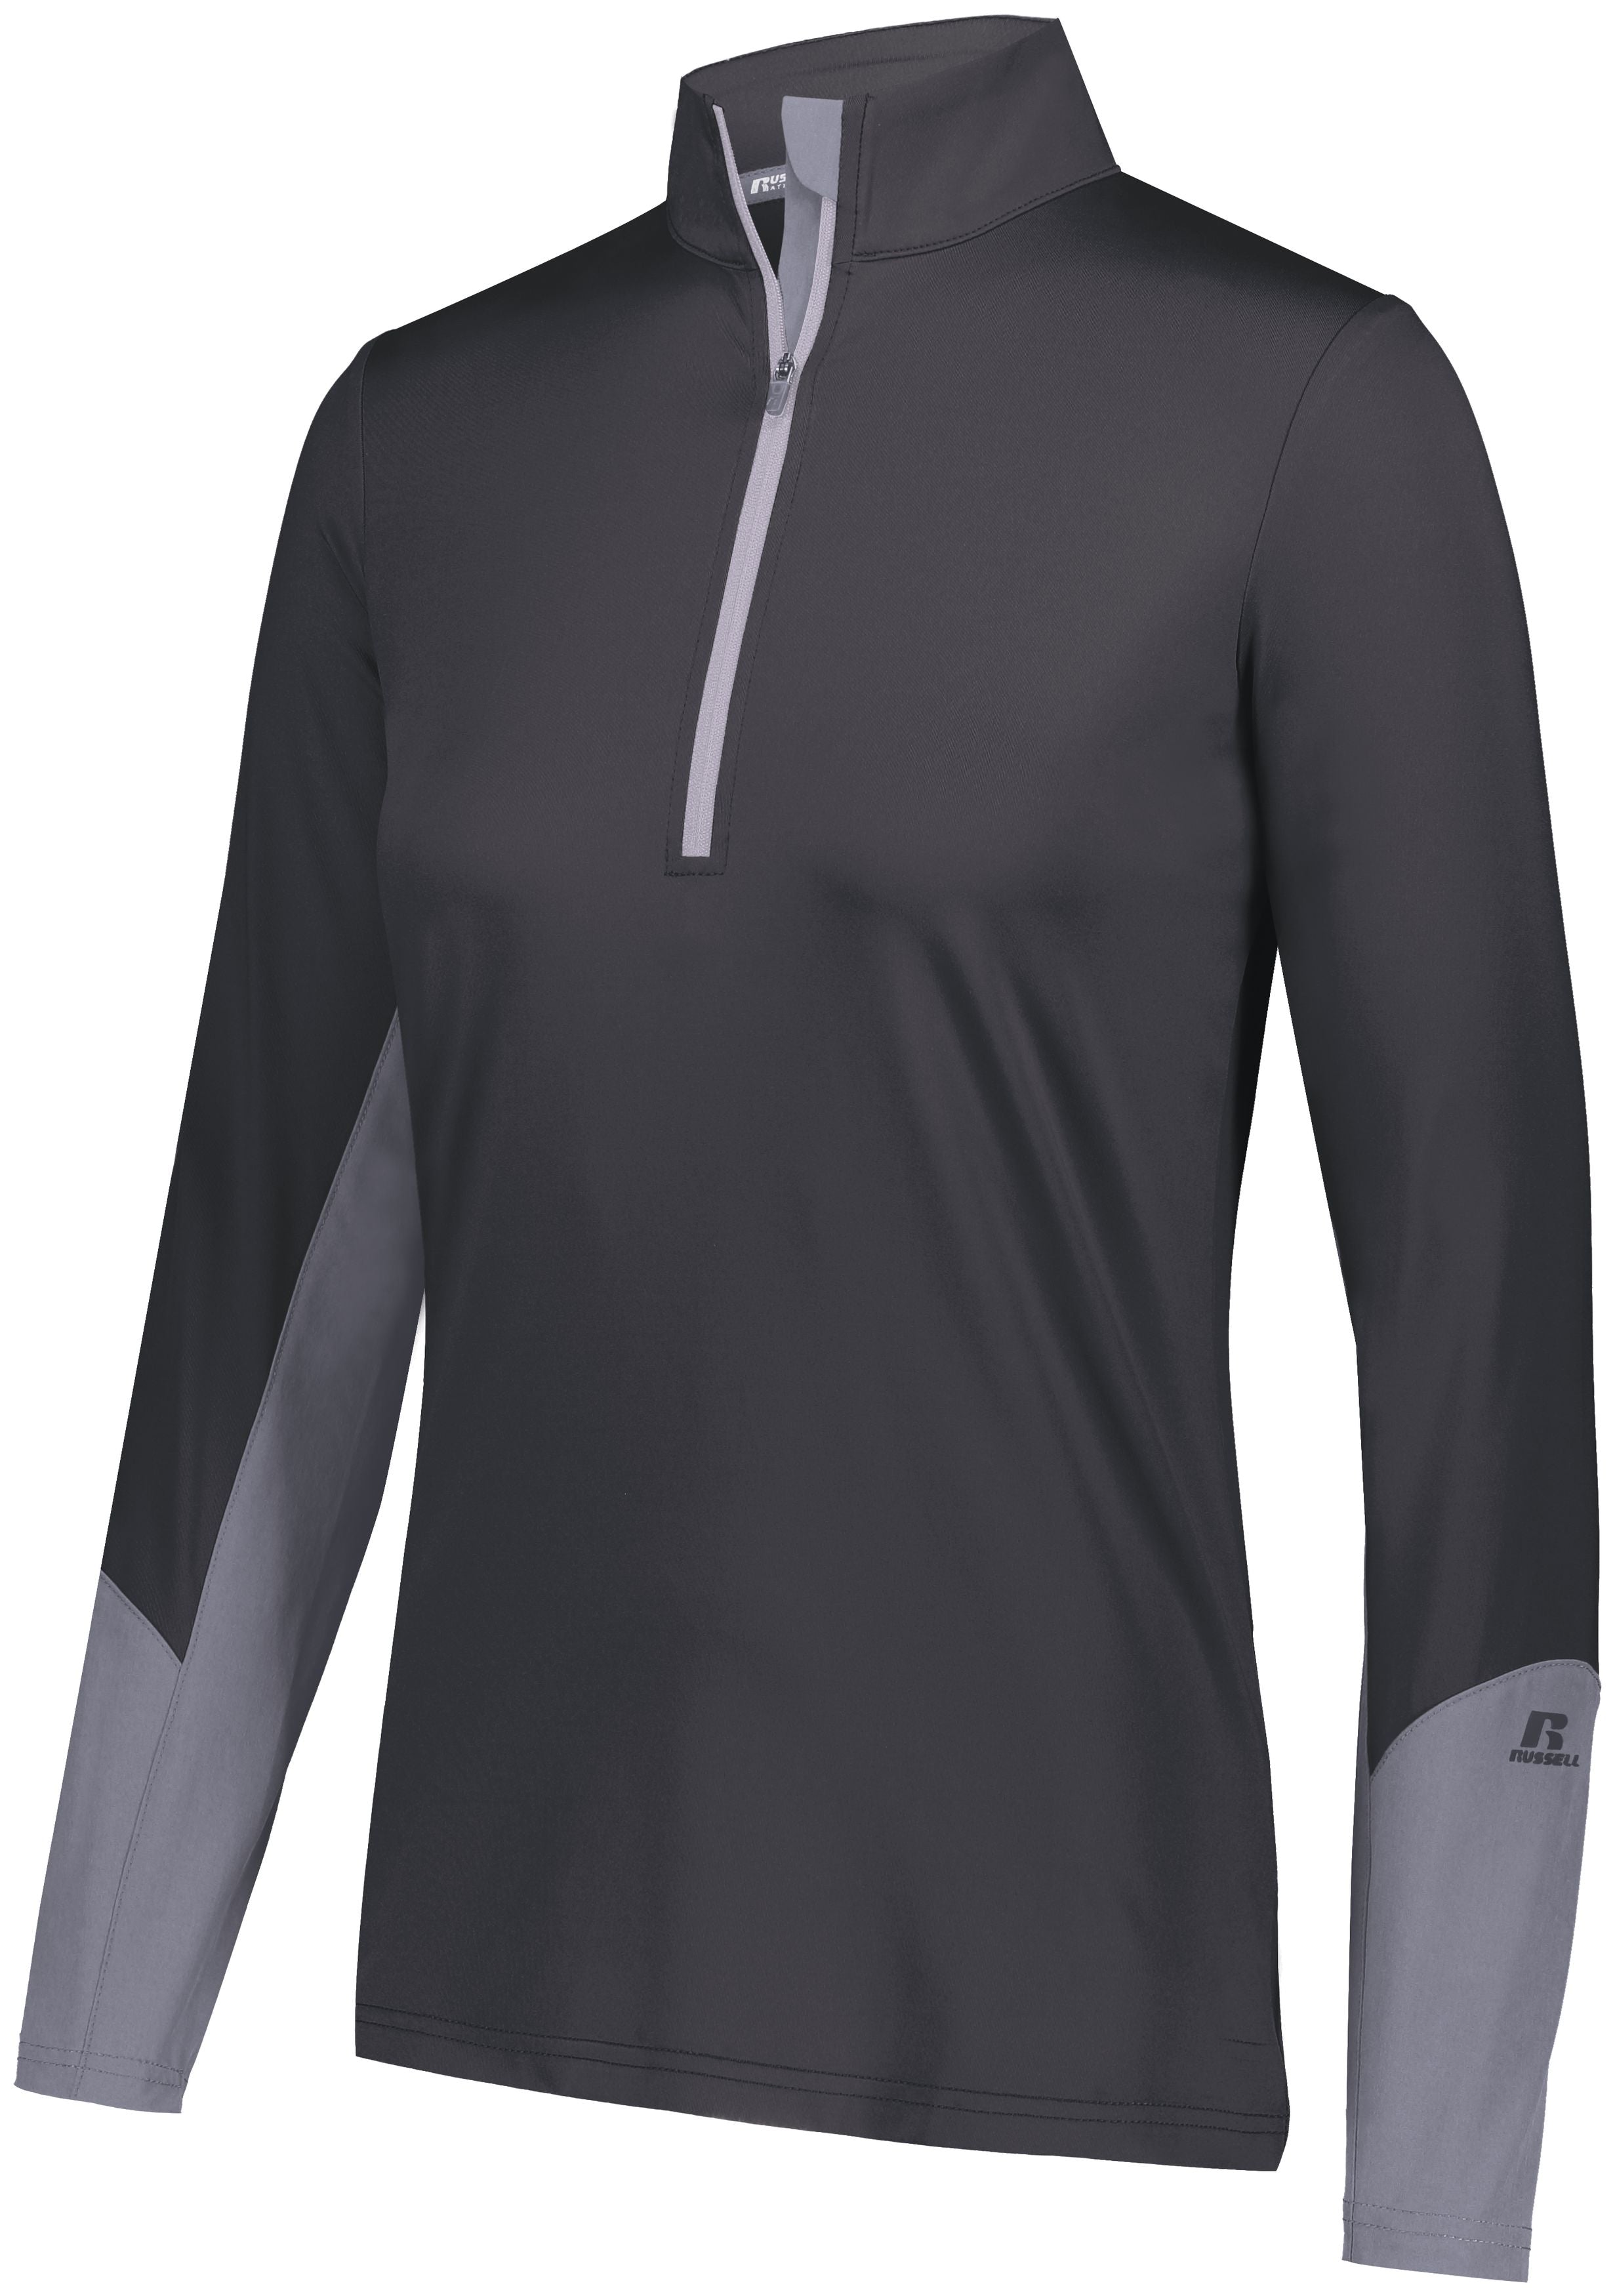 Russell Athletic Ladies Hybrid Pullover in Stealth/Steel  -Part of the Ladies, Russell-Athletic-Products, Shirts product lines at KanaleyCreations.com